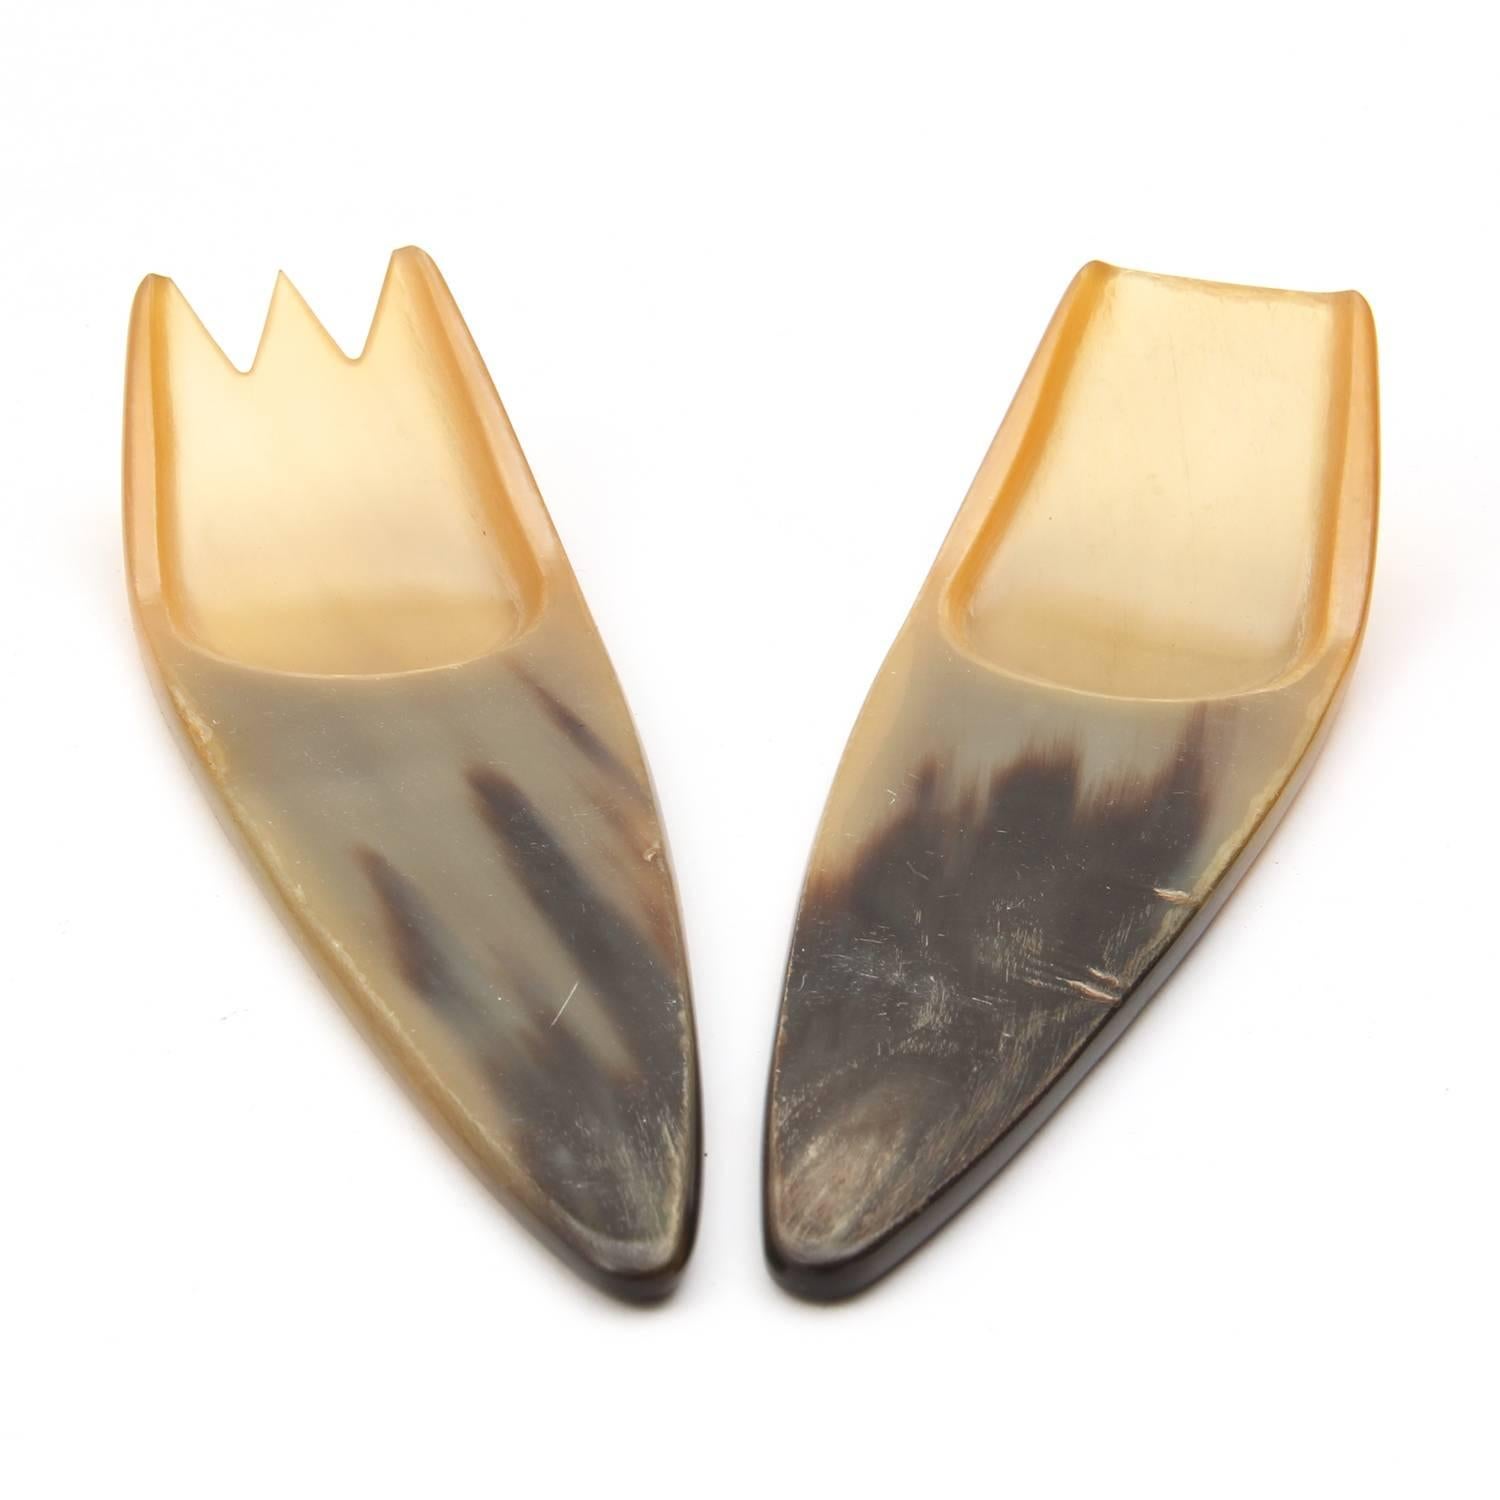 A rare pair of hand carved horn salad servers by Carl Aubock. Made in Austria, circa 1950s.